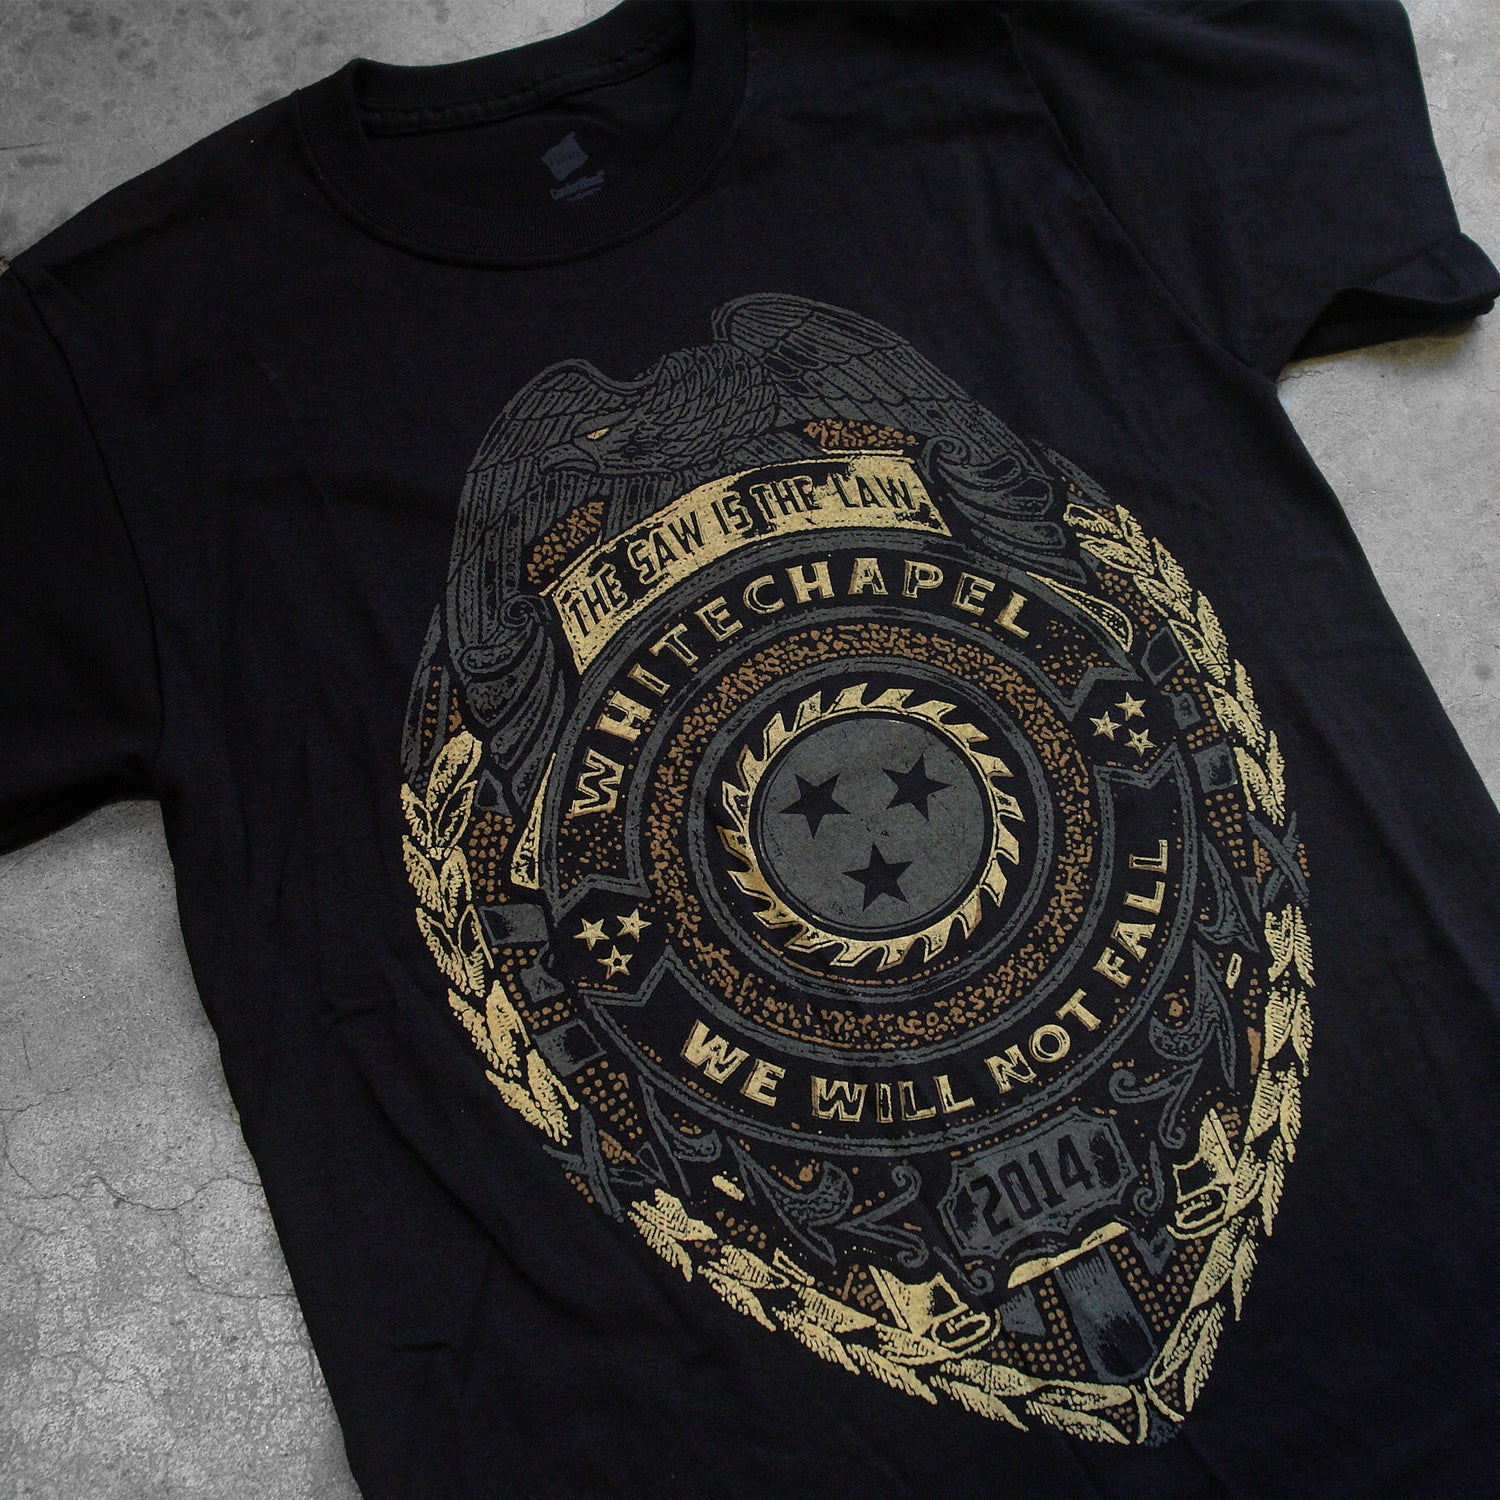 close up, angled Image of a black tshirt against a concrete background. The shirt is a graphic of a badge. There is a bird at the top, and below that it says the saw is the law. the center of the badge has a circle with a sawblade with three stars on the inside of the saw blade. Wrapped around the circle reads "whitechapel, we will not fall". Below this it says 2014. The graphic is a faded grey/gold and black color.